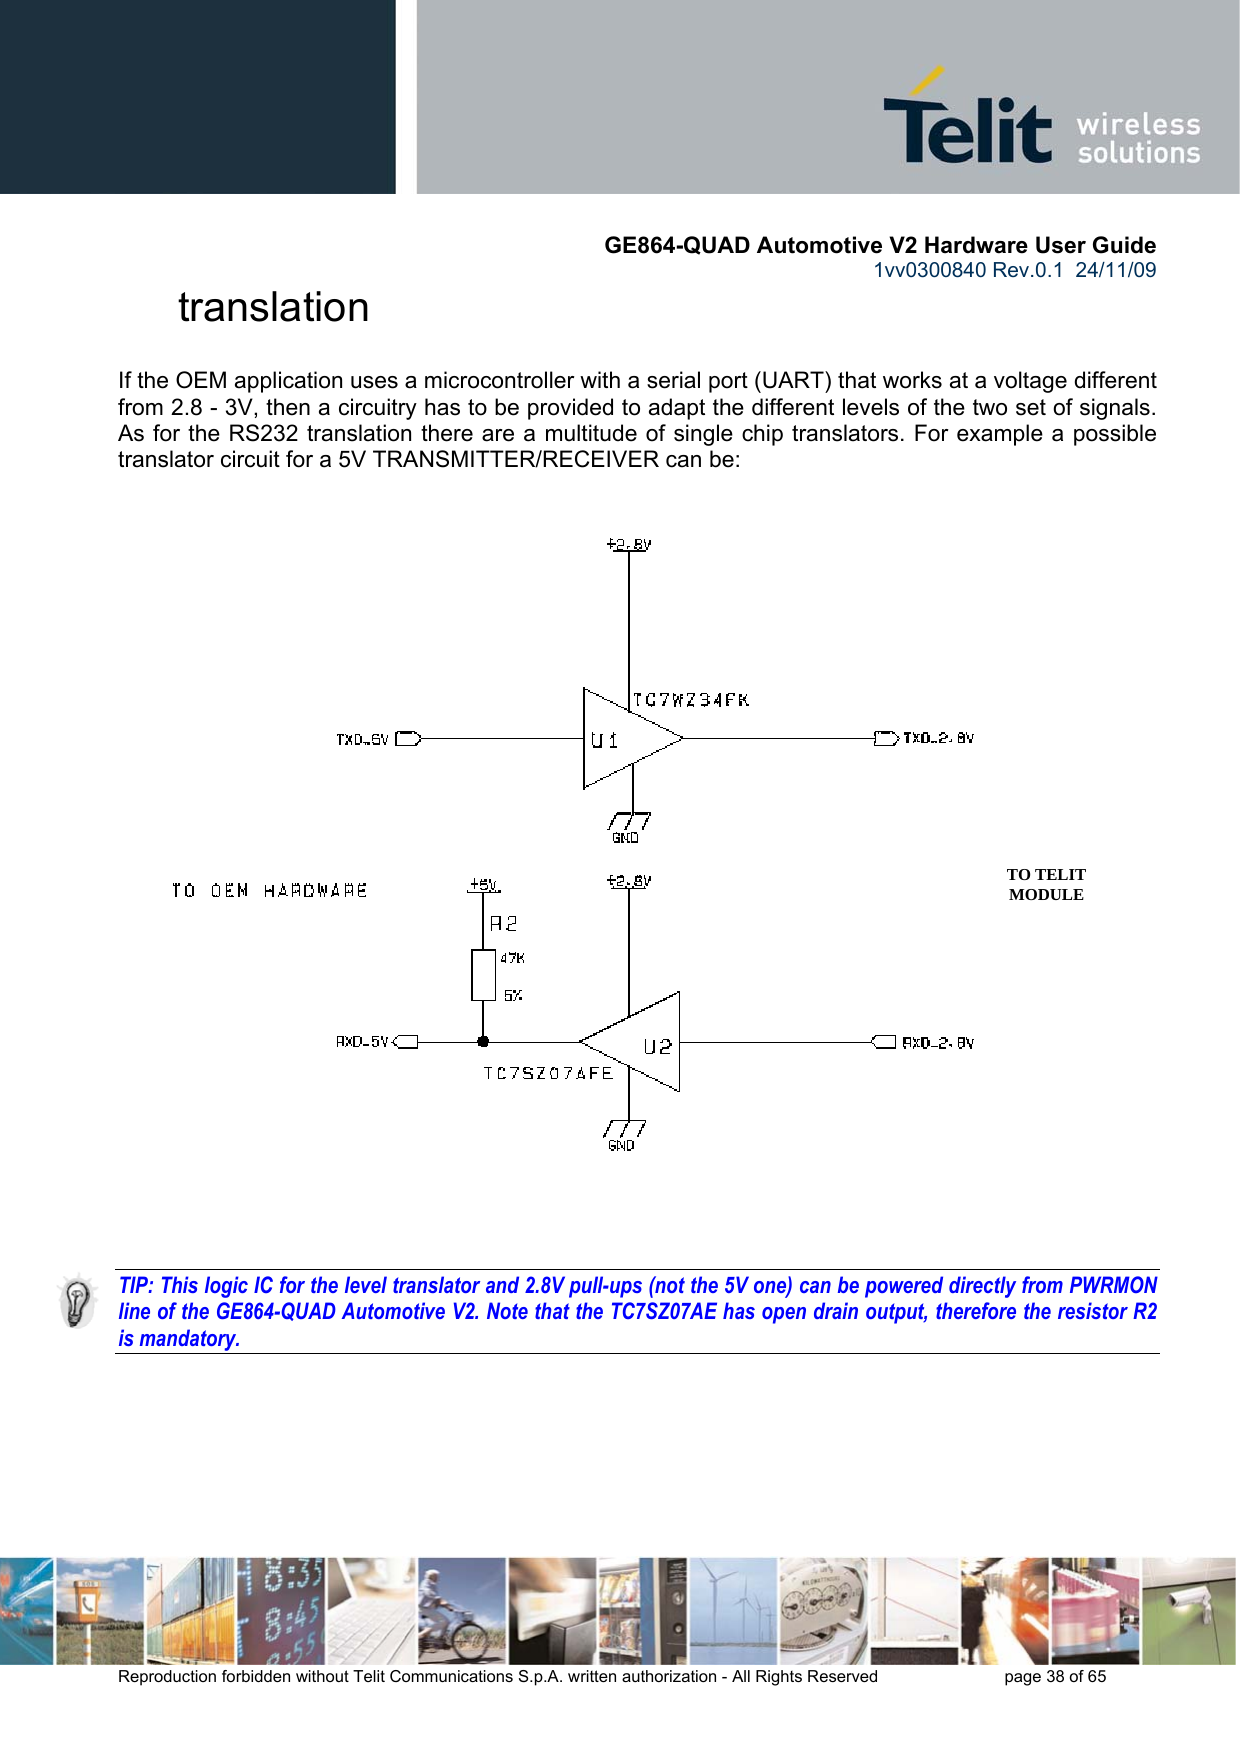       GE864-QUAD Automotive V2 Hardware User Guide 1vv0300840 Rev.0.1  24/11/09      Reproduction forbidden without Telit Communications S.p.A. written authorization - All Rights Reserved    page 38 of 65  translation If the OEM application uses a microcontroller with a serial port (UART) that works at a voltage different from 2.8 - 3V, then a circuitry has to be provided to adapt the different levels of the two set of signals. As for the RS232 translation there are a multitude of single chip translators. For example a possible translator circuit for a 5V TRANSMITTER/RECEIVER can be:      TIP: This logic IC for the level translator and 2.8V pull-ups (not the 5V one) can be powered directly from PWRMON line of the GE864-QUAD Automotive V2. Note that the TC7SZ07AE has open drain output, therefore the resistor R2 is mandatory.  TO TELIT MODULE 